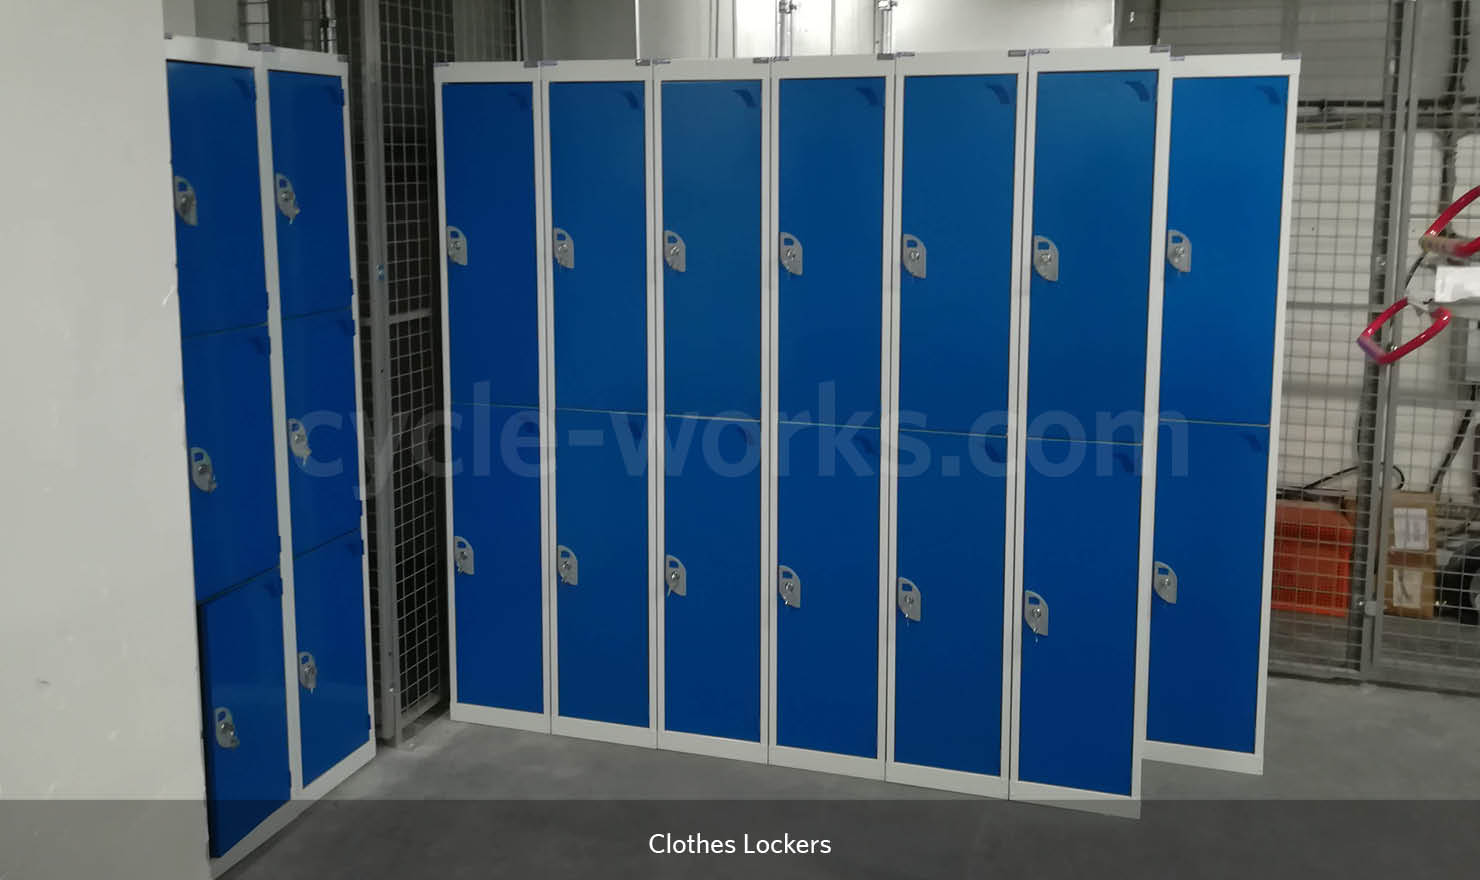 Clothes Lockers